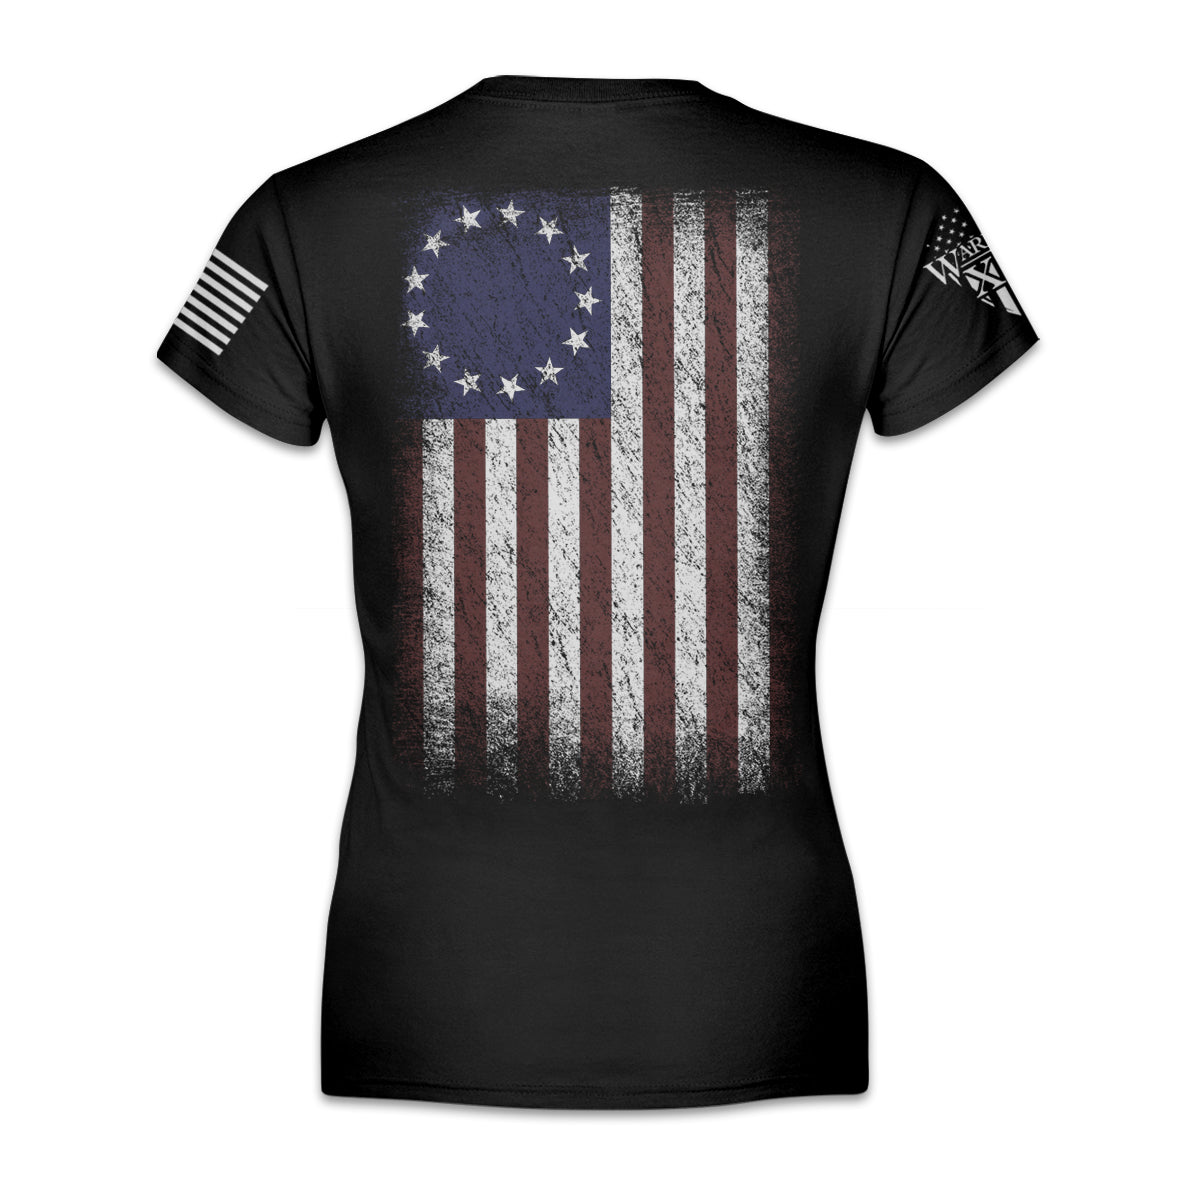 Women's shirt with the Betsy Ross flag printed on the back.